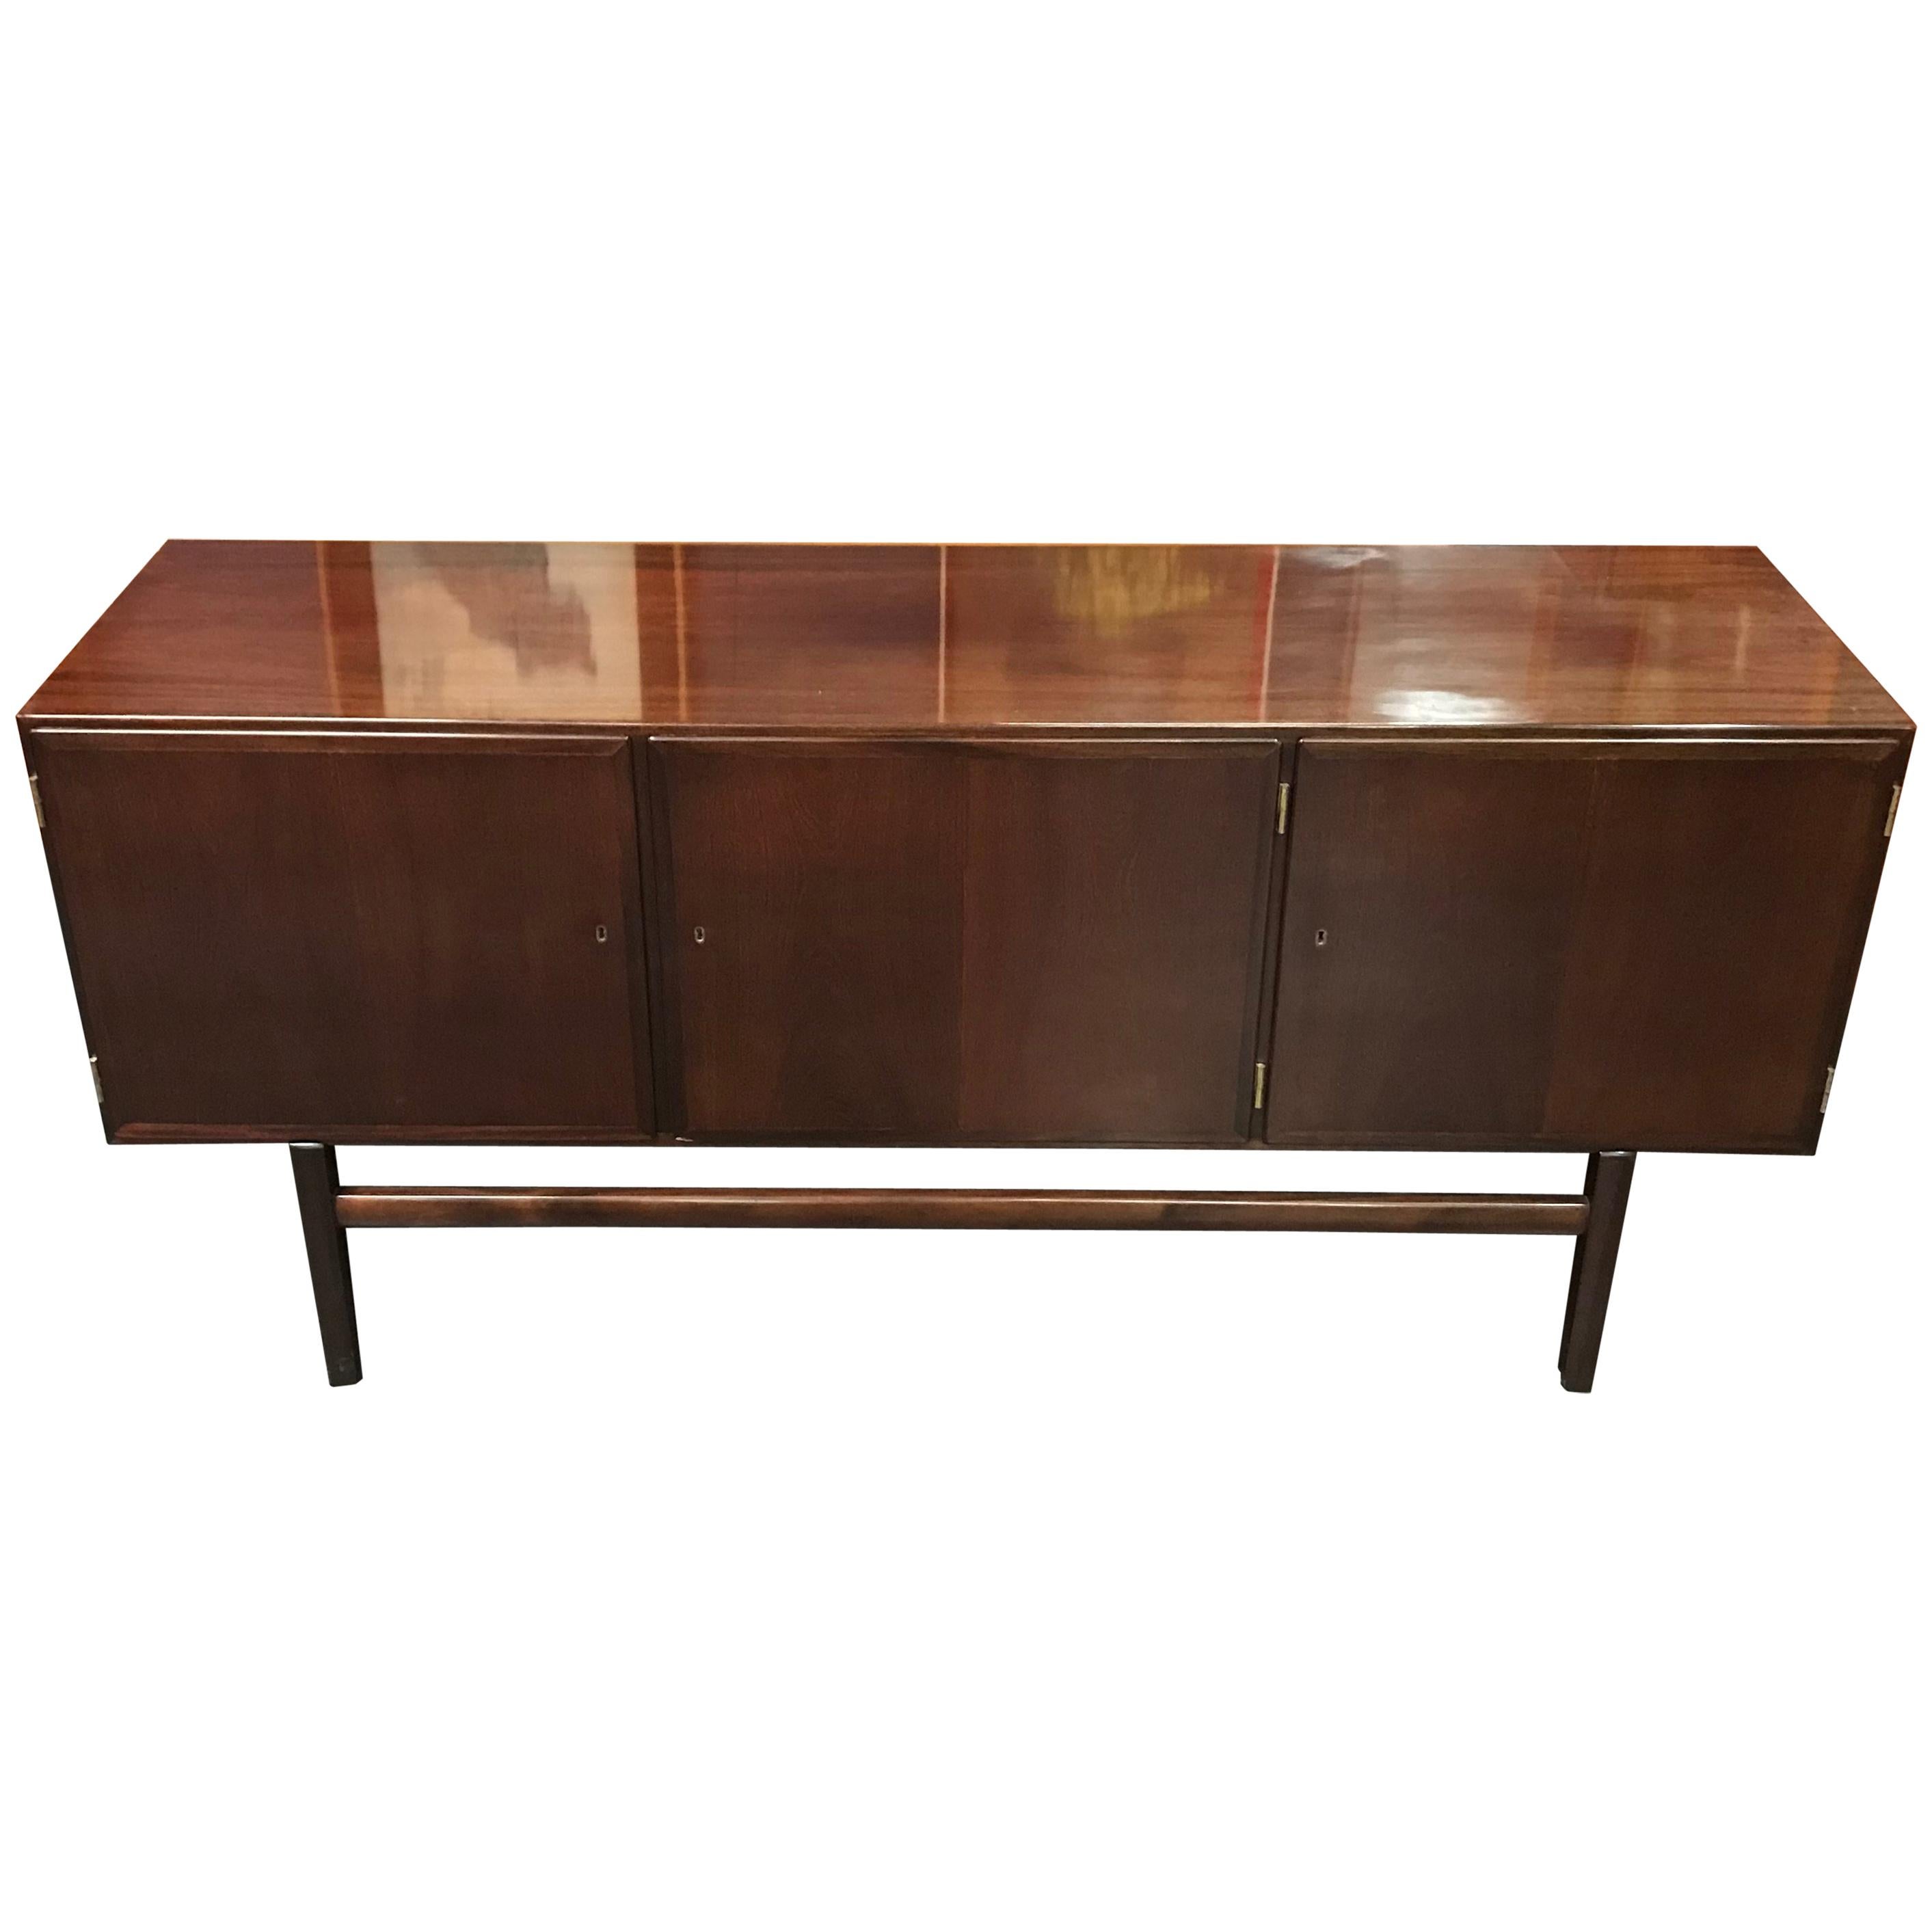 Danish Midcentury Mahogany Sideboard by Ole Wanscher for Poul Jeppesen For Sale